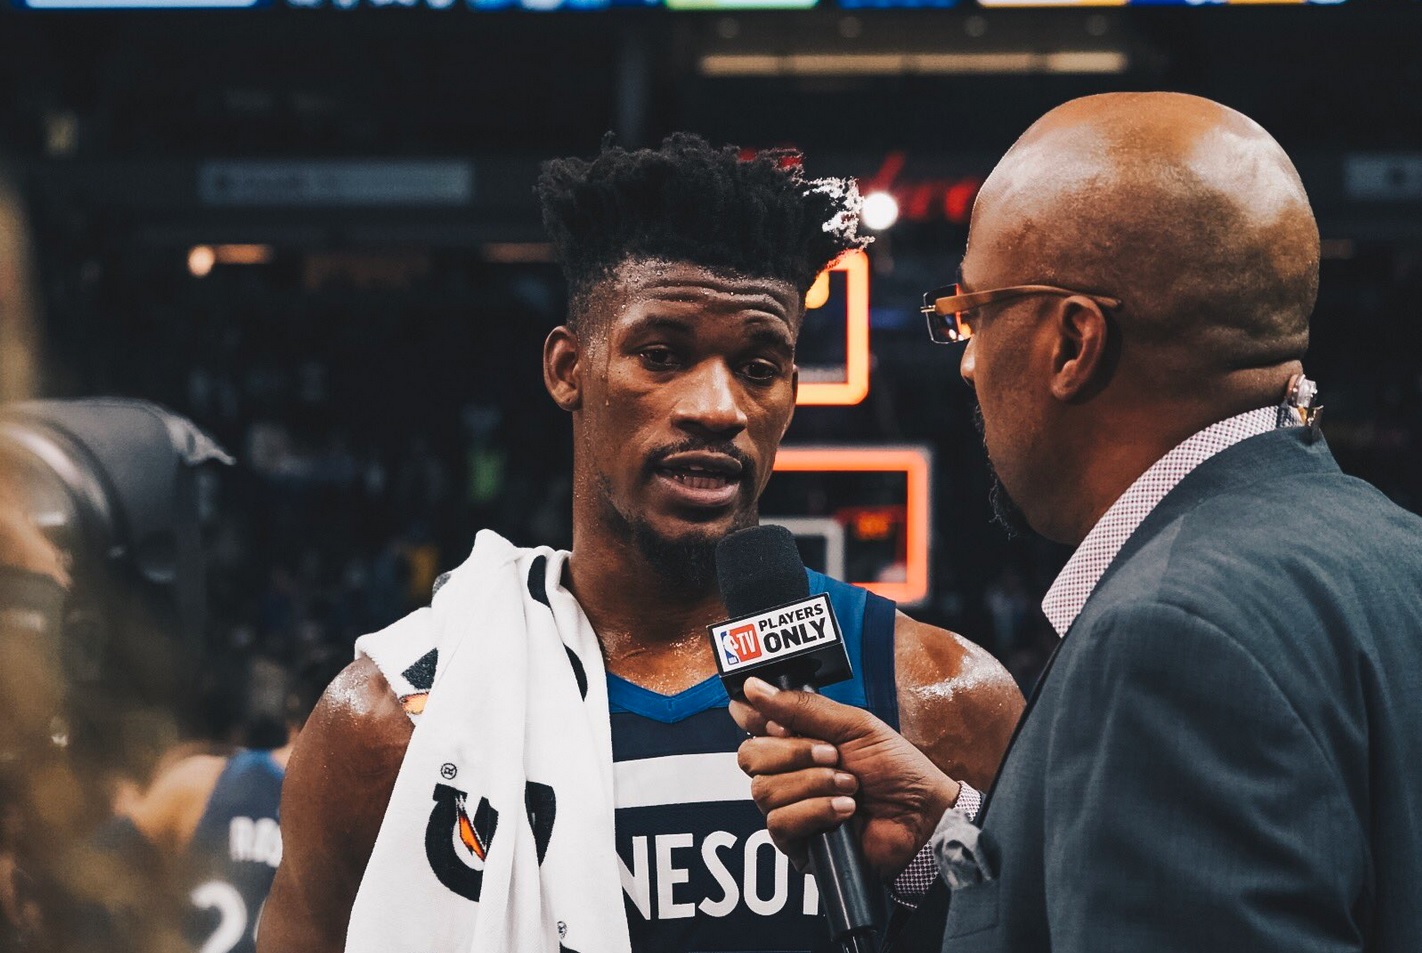 Minnesota Timberwolves: Jimmy Butler Leads In Narrow Win Over Lakers